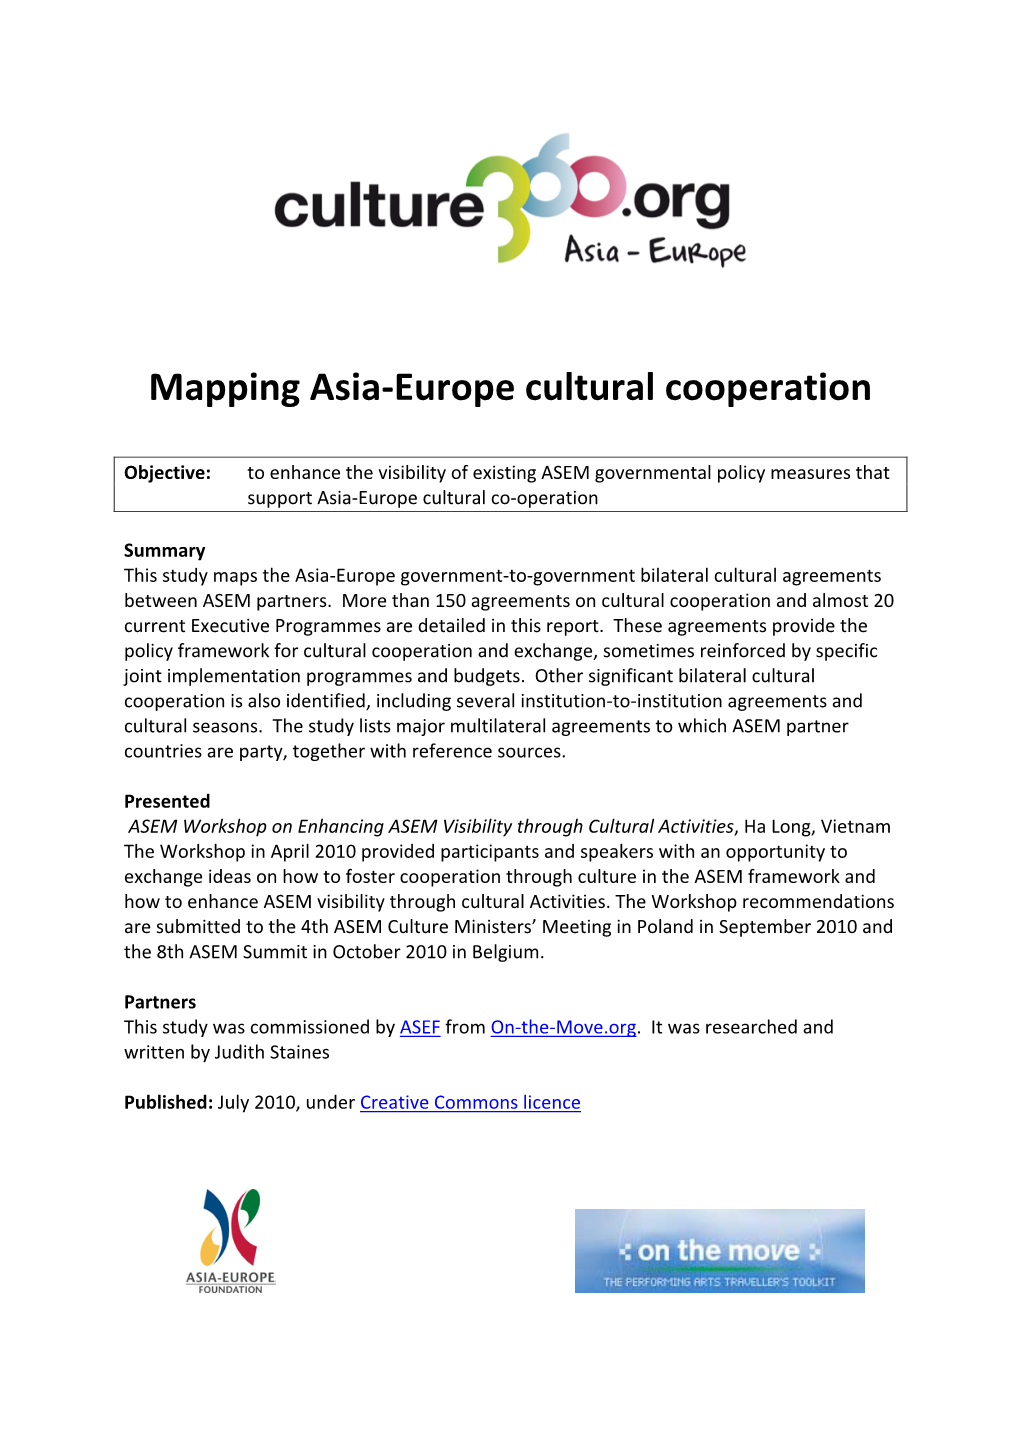 Mapping Asia-Europe Cultural Cooperation